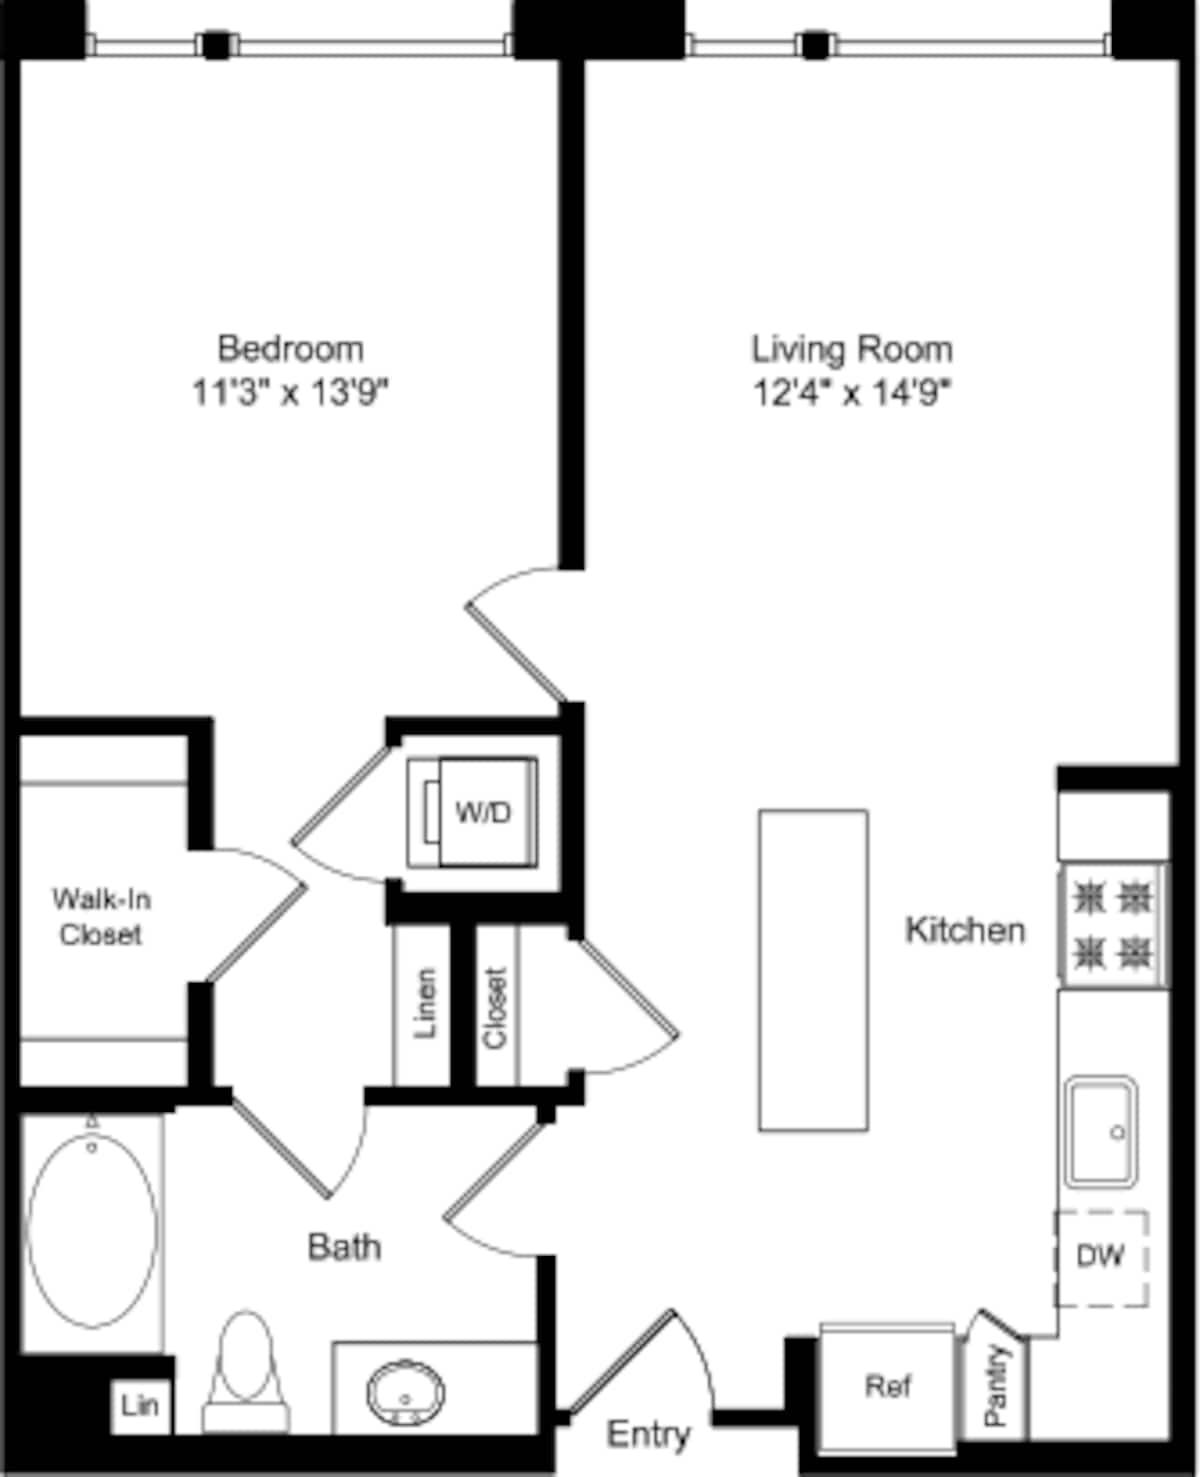 Floorplan diagram for One Bed A1, showing 1 bedroom